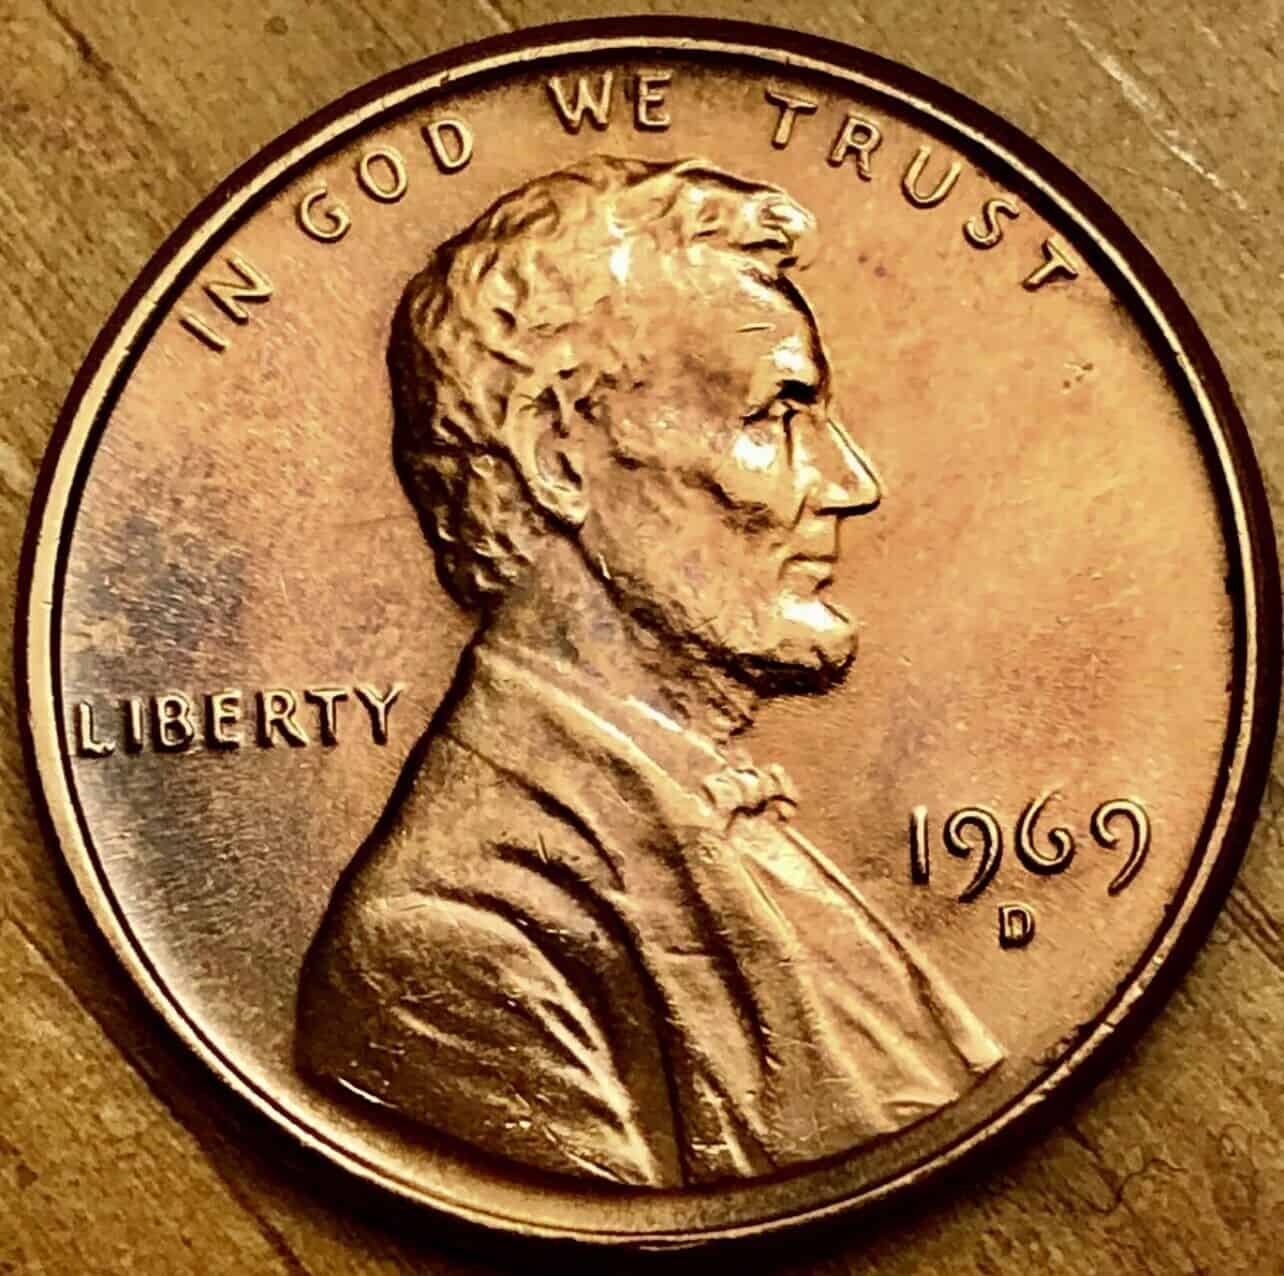 1969 D Penny Value